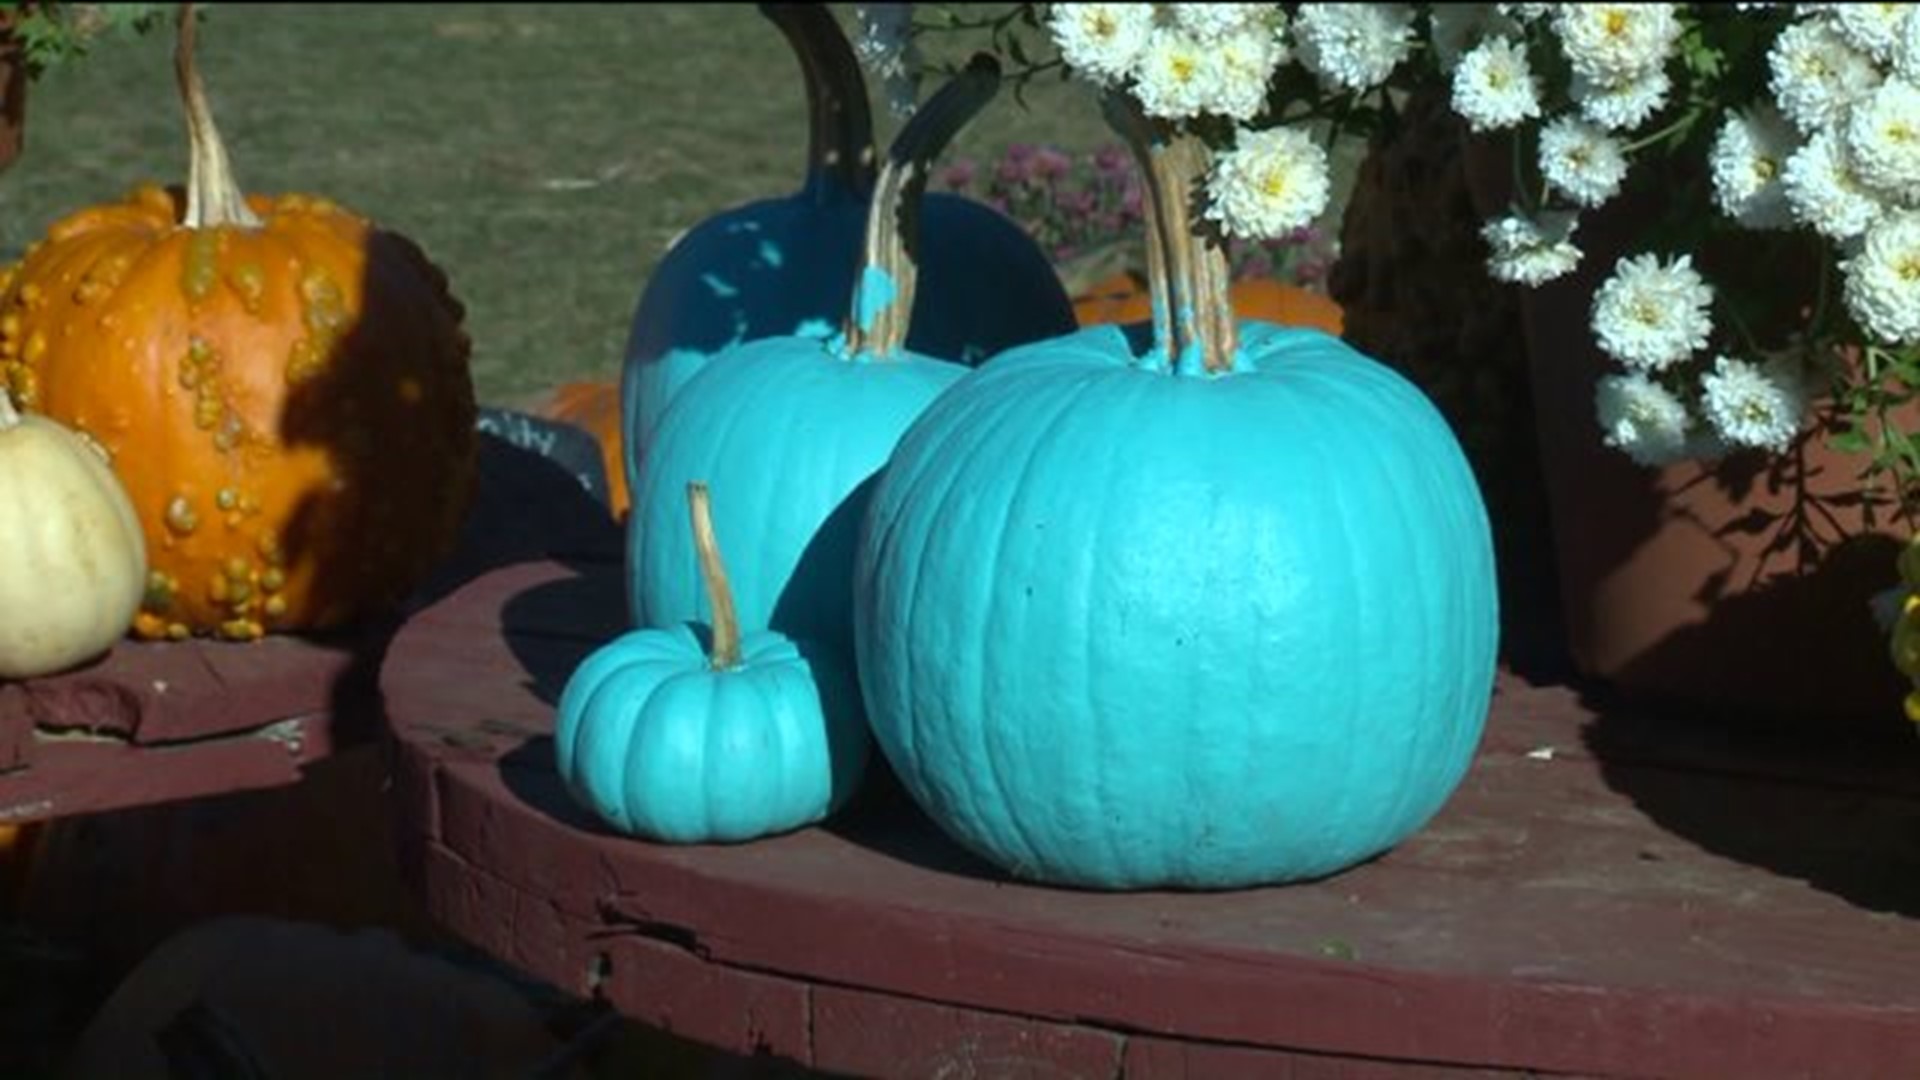 The Teal Pumpkin Project